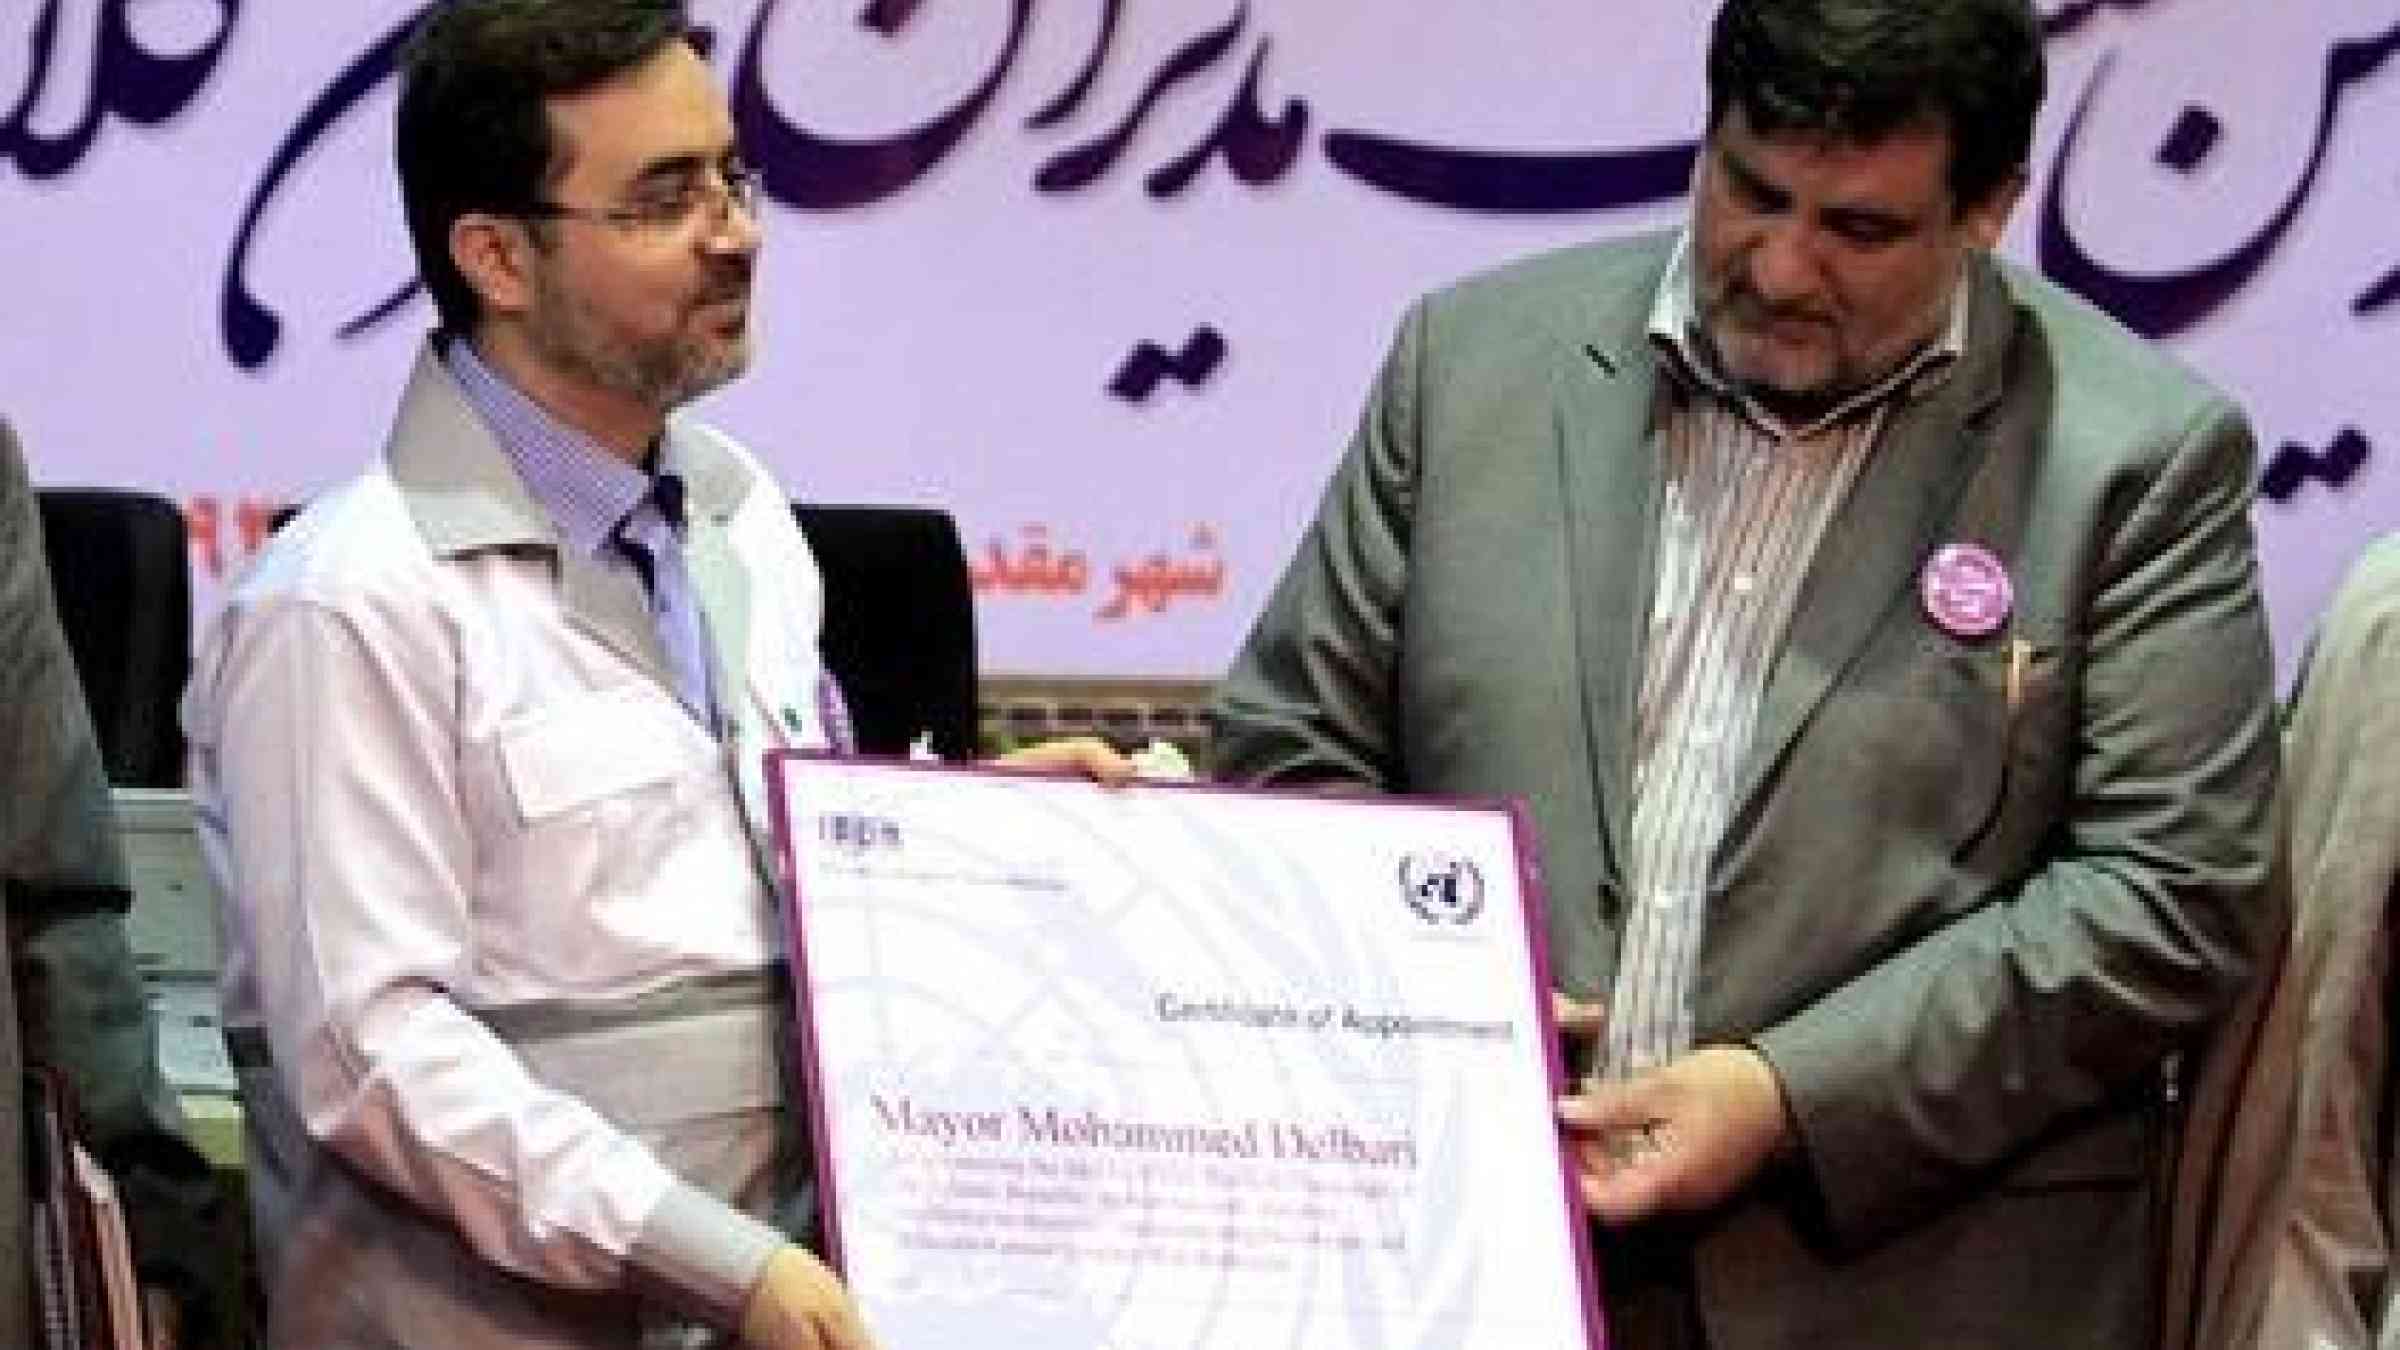 The Iranian city of Qom joined UNISDR’s Making Cities Resilient Campaign last year and has made significant progress since then. (Photo: UNISDR)